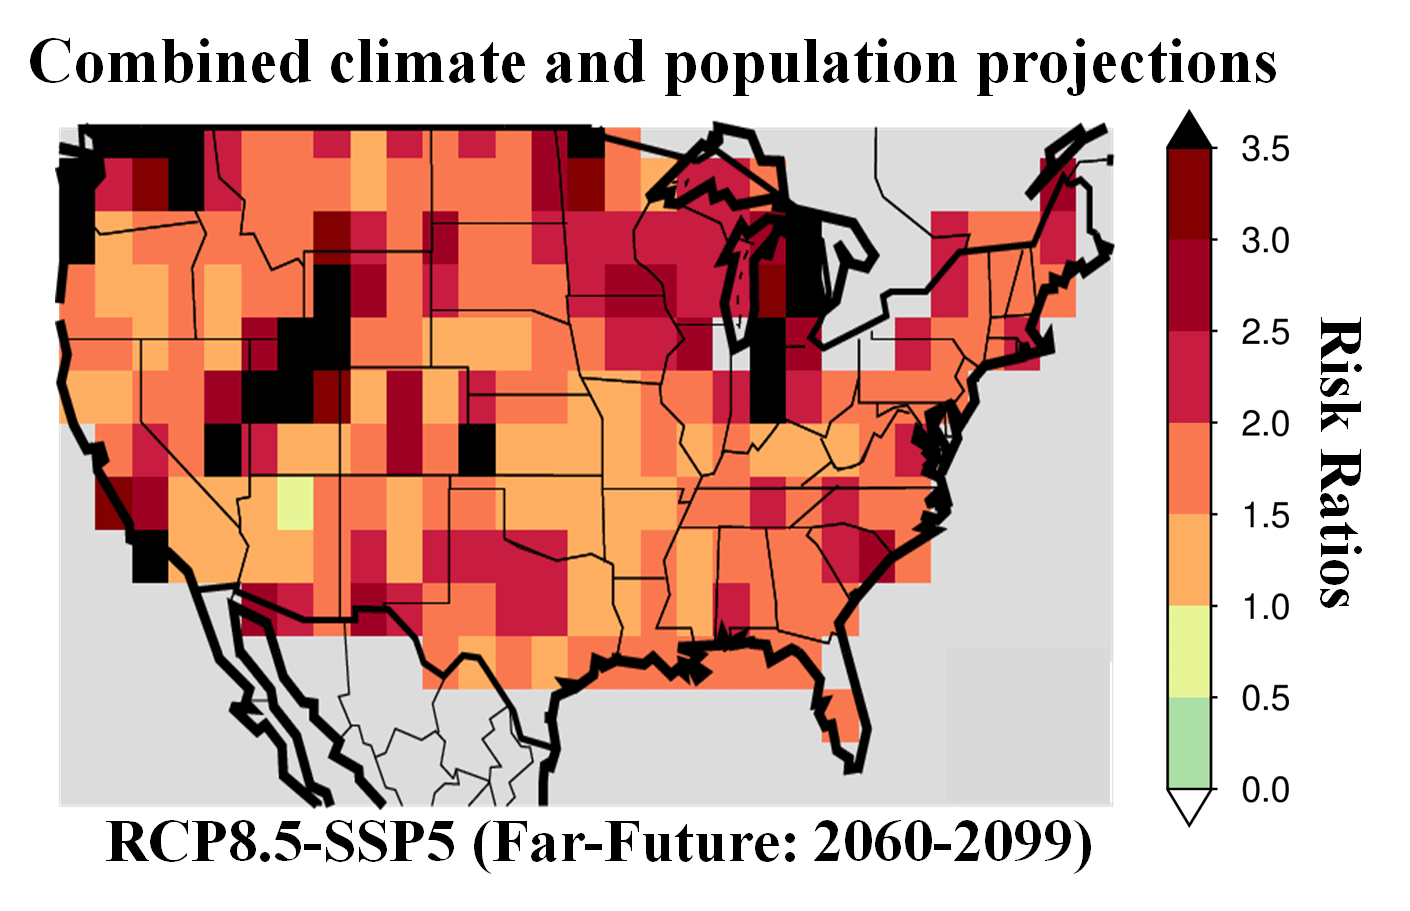 maps of the US with color intensity showing where heat stress will be most acute in the last half of the 21st century due to climate change, population growth, and combined effects